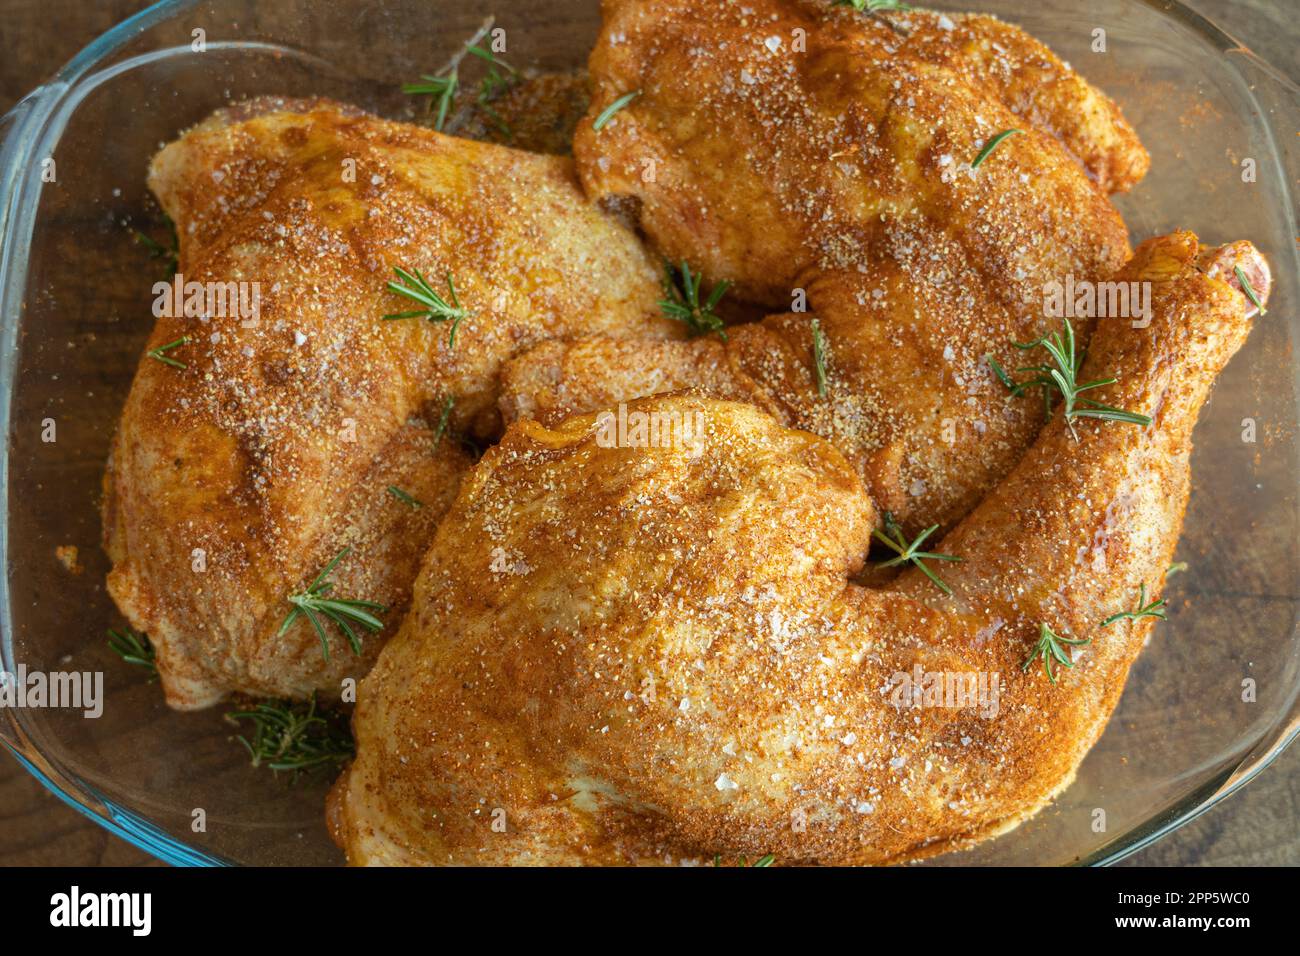 Marinated chicken tights with salt, black pepper, rosemary and paprika ready to be cooked Stock Photo